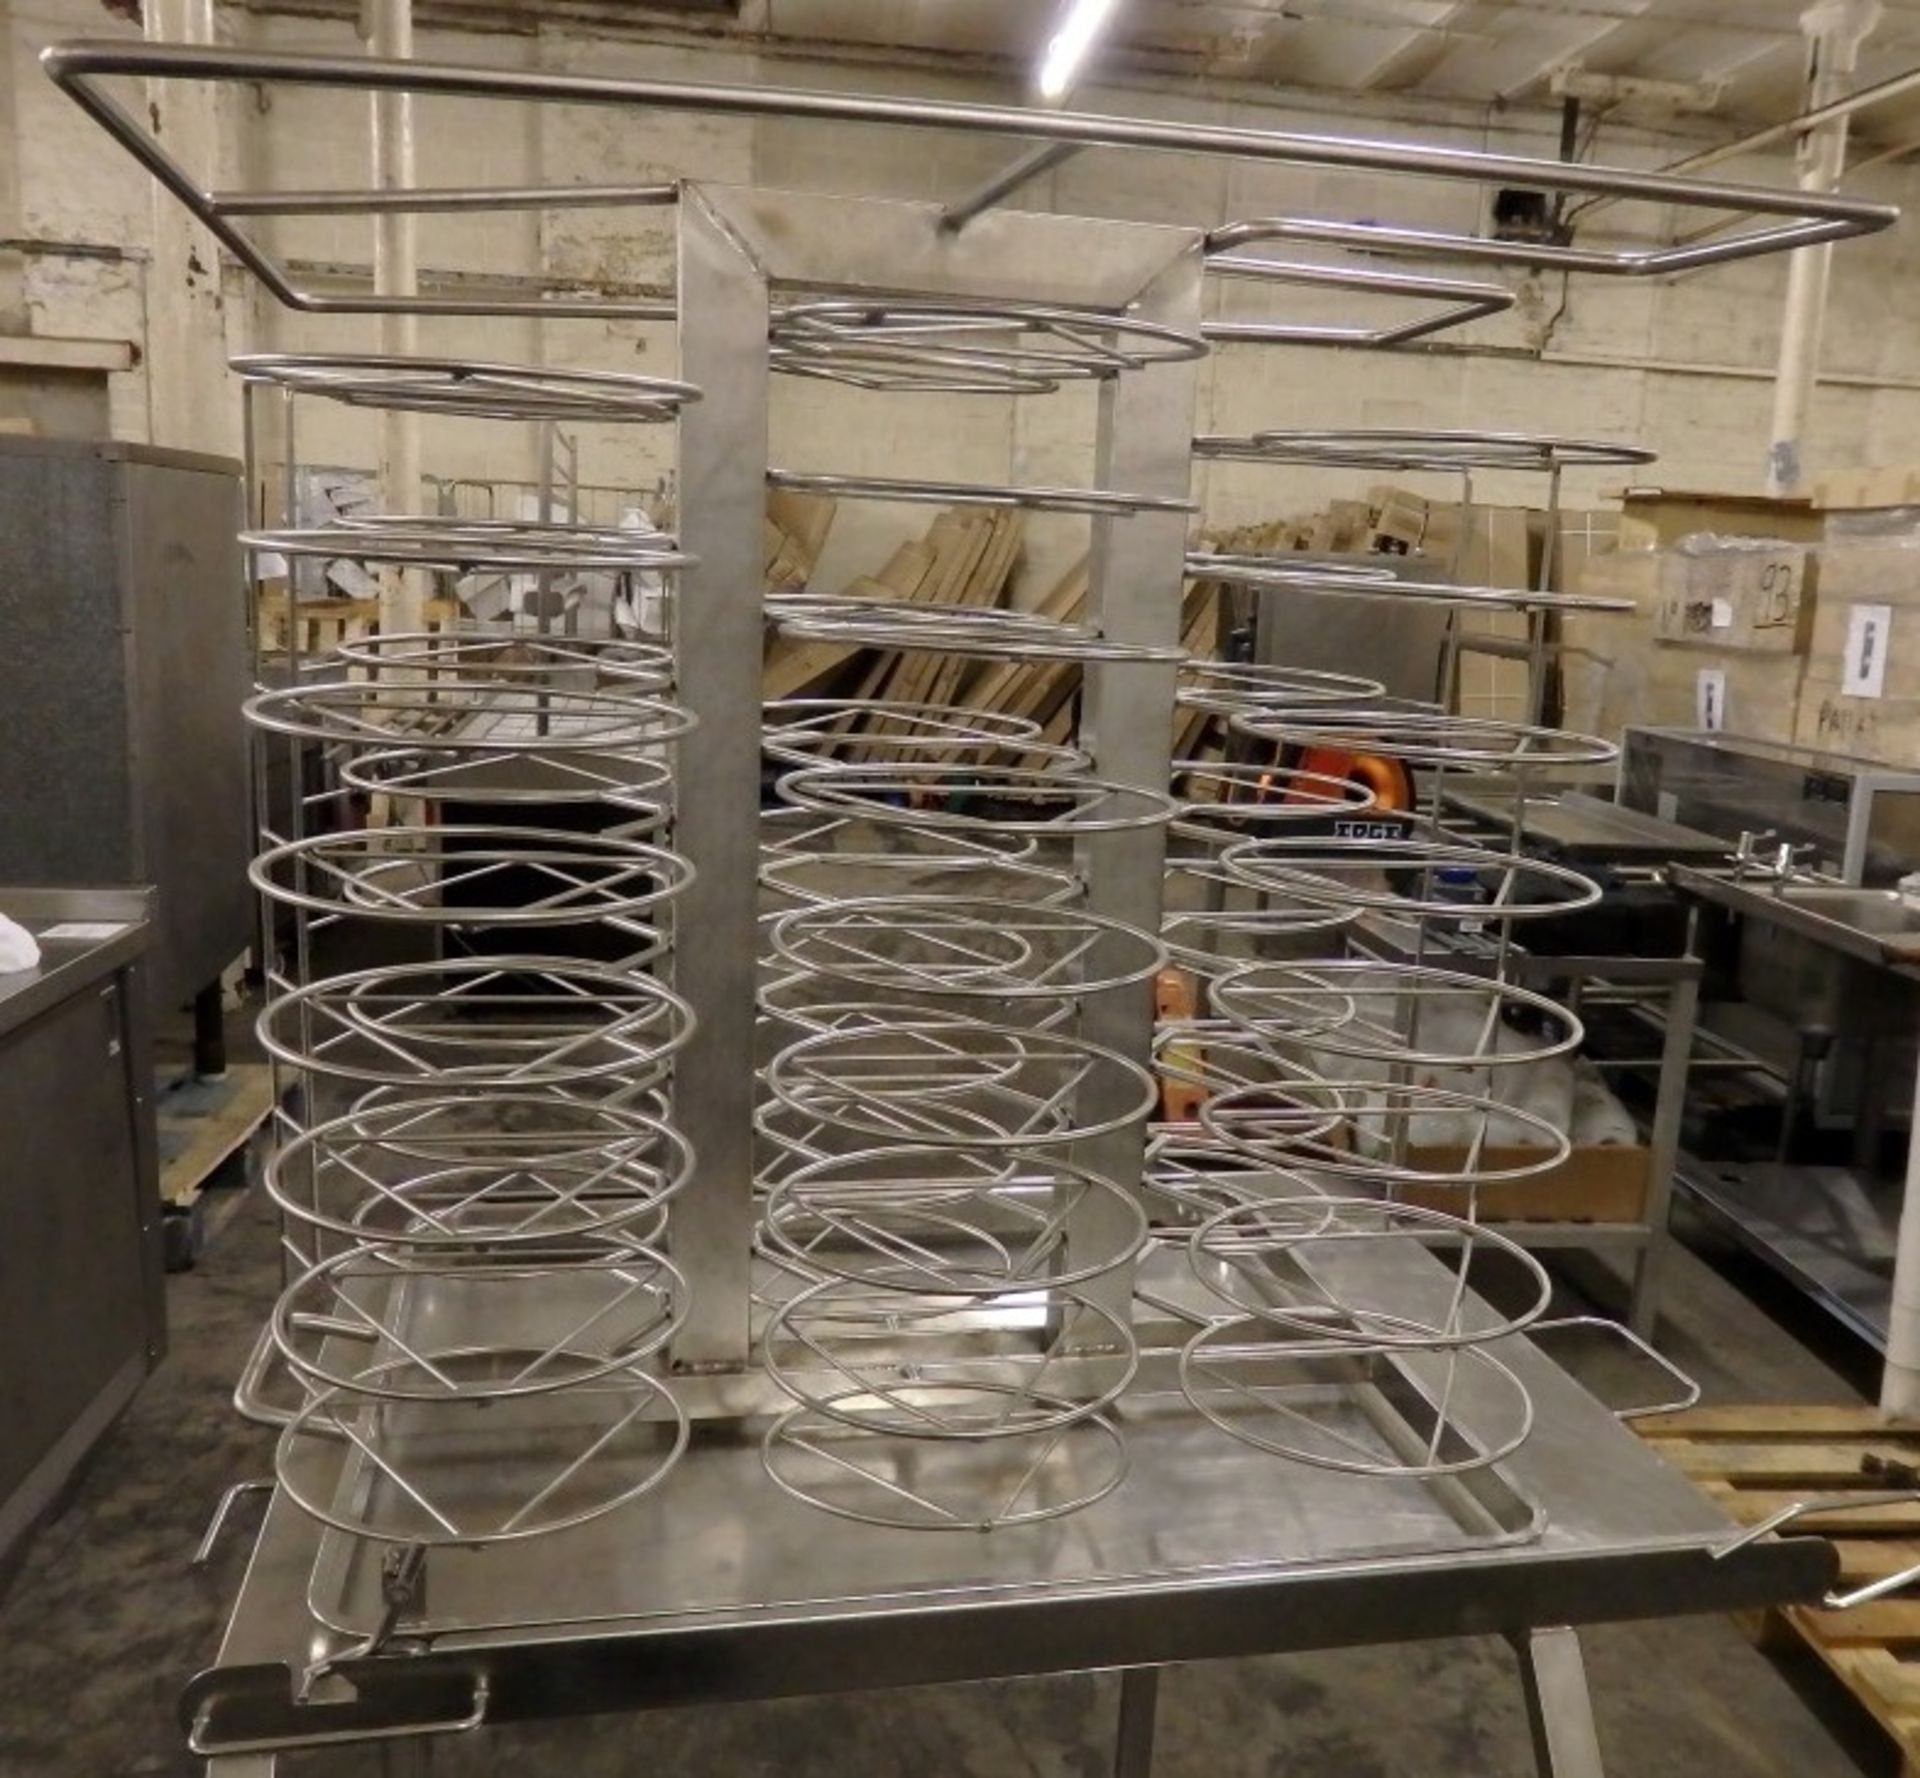 1 x Stainless Steel Plate Rack / Trolley With Thermal Cover -  Only Used Once Before  - 50 Plate - Image 3 of 4